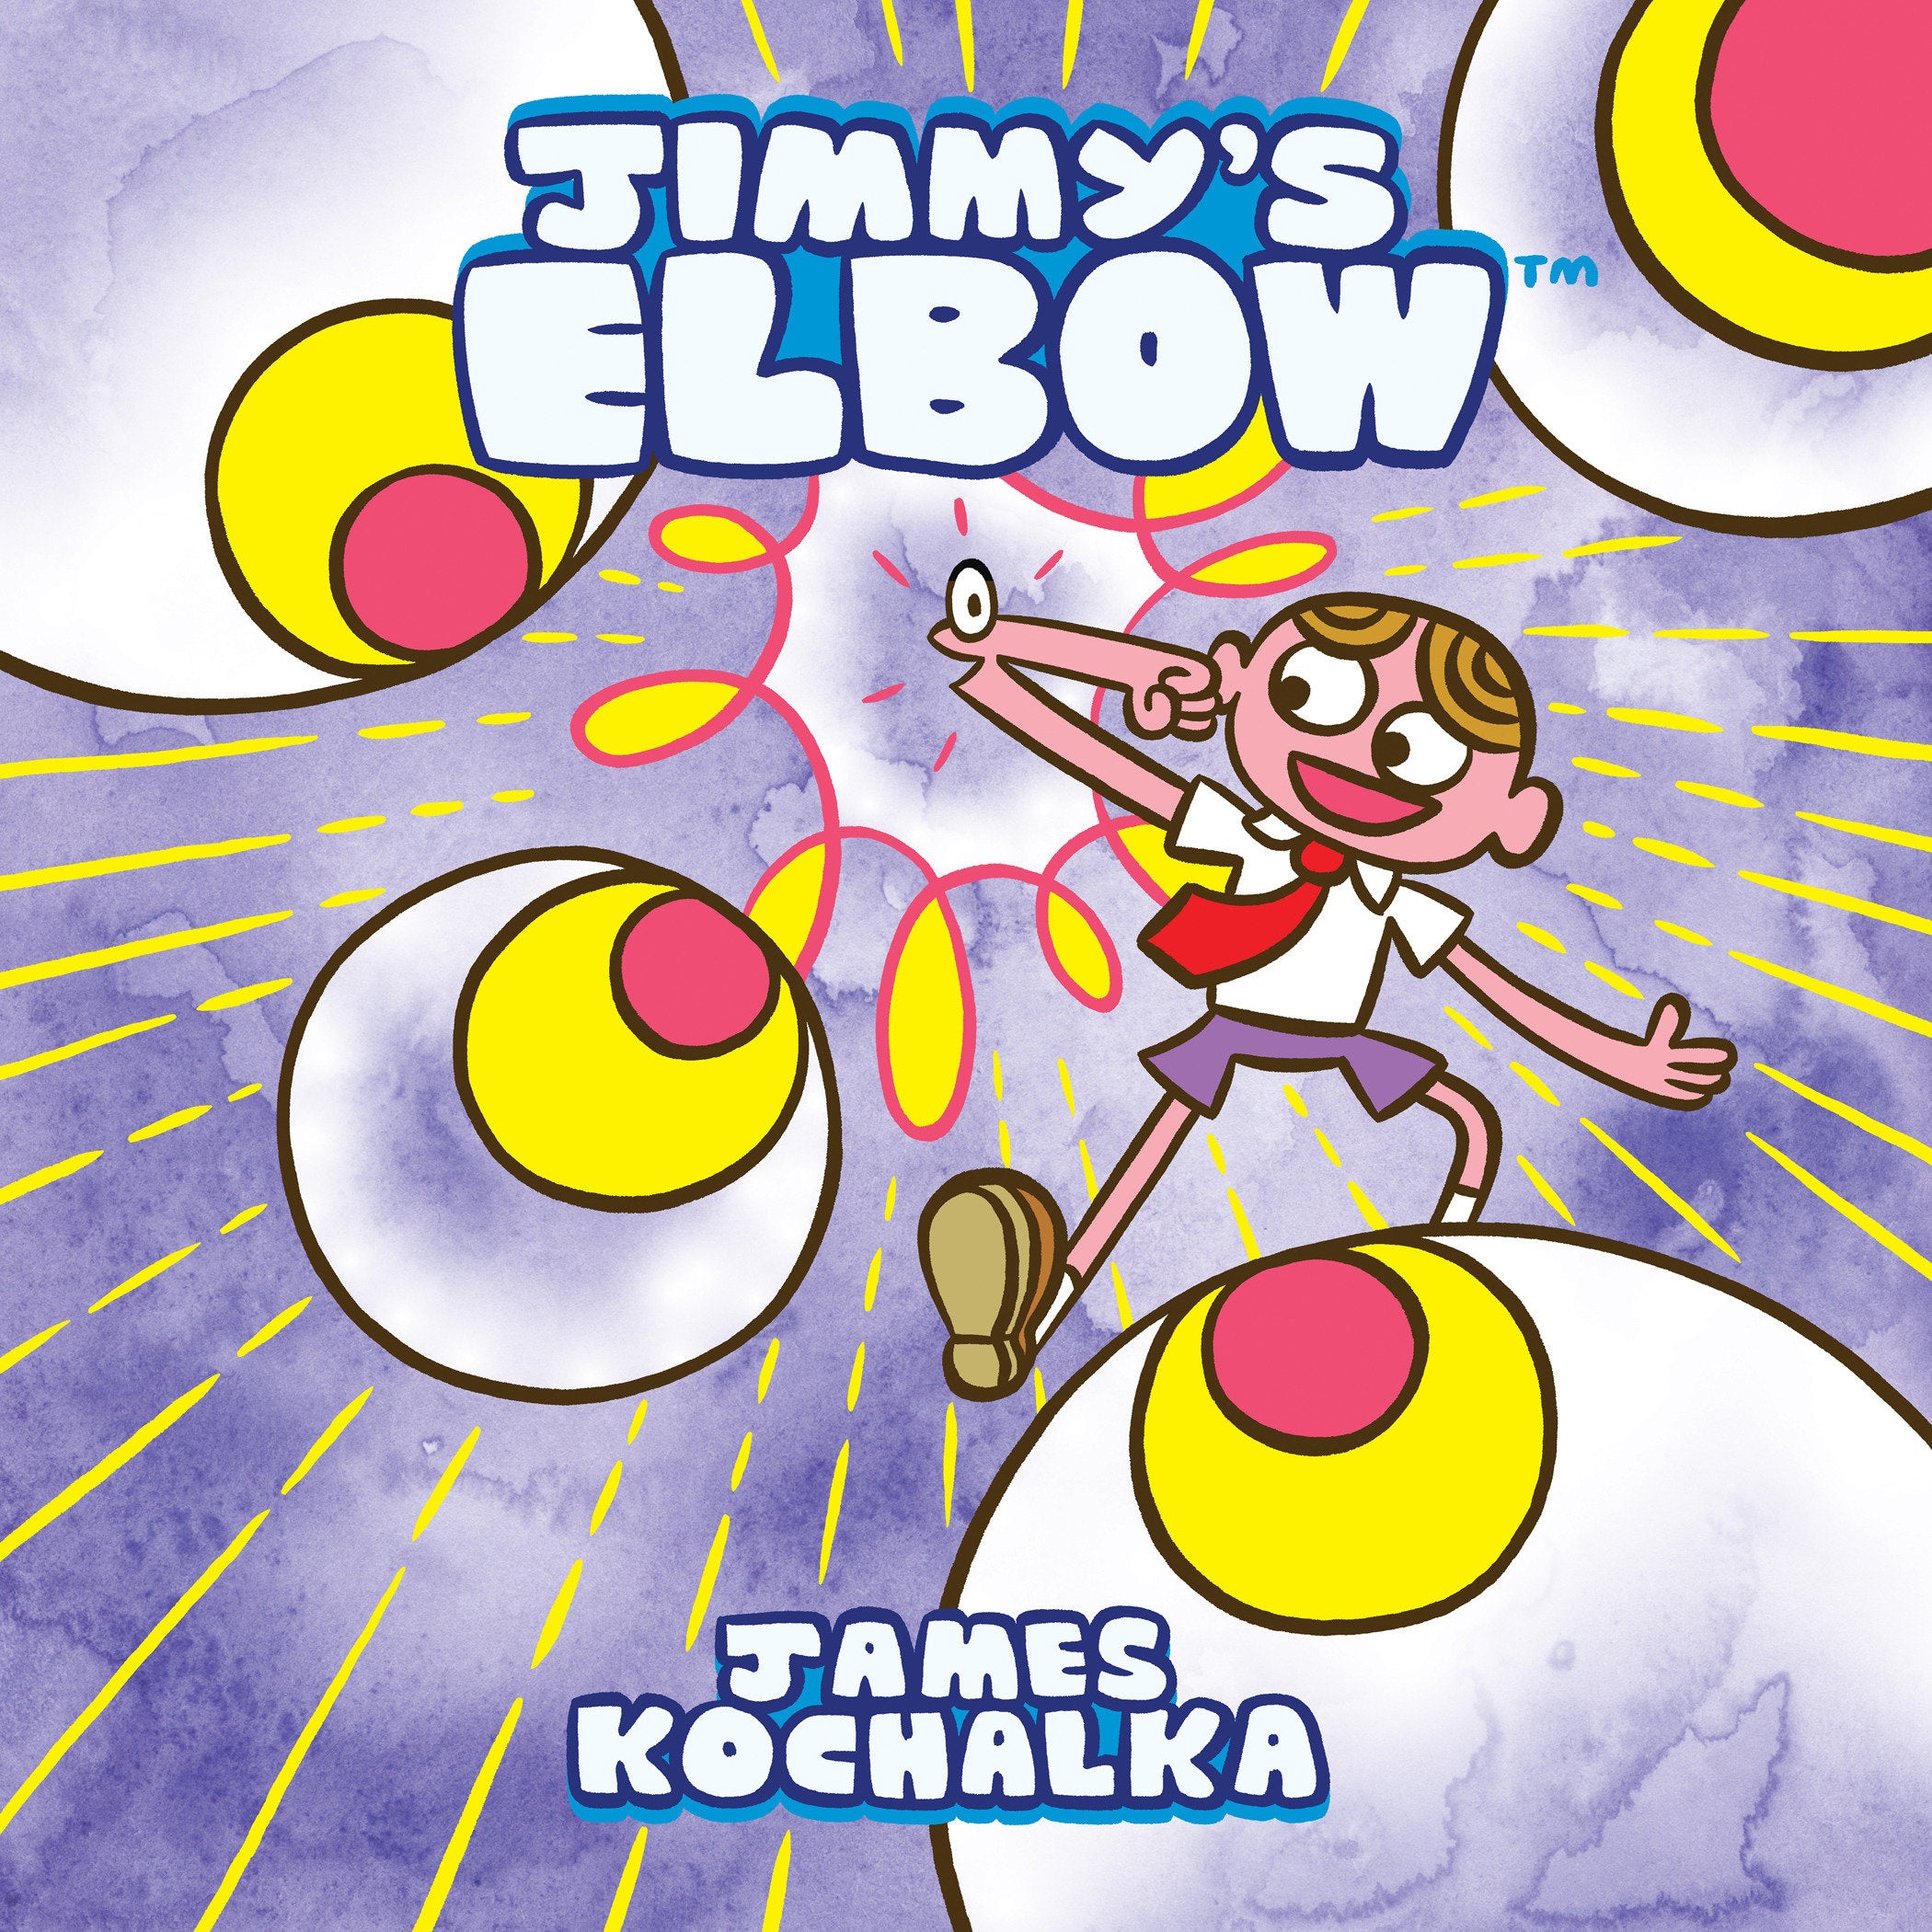 Jimmy'S Elbow | BD Cosmos